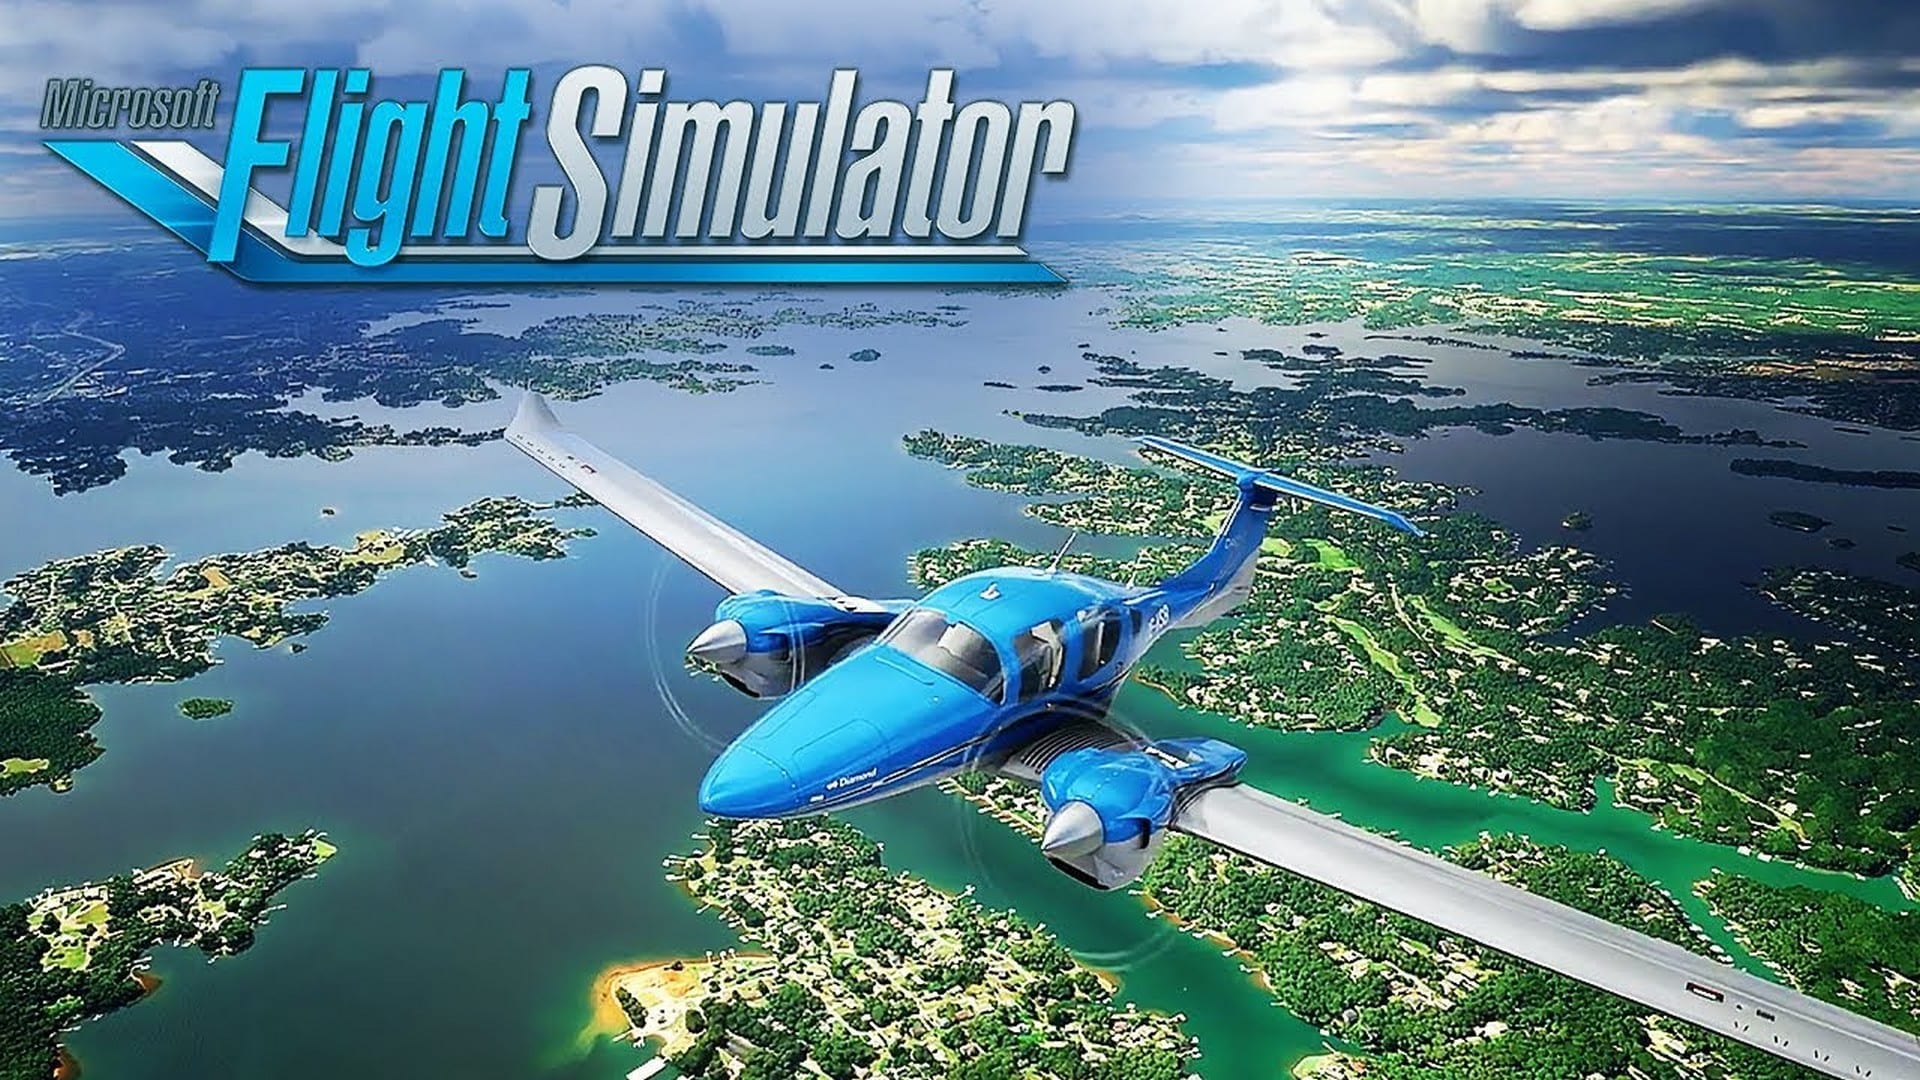 Microsoft Flight Simulator Set For Launch On August 18 For PC, Also